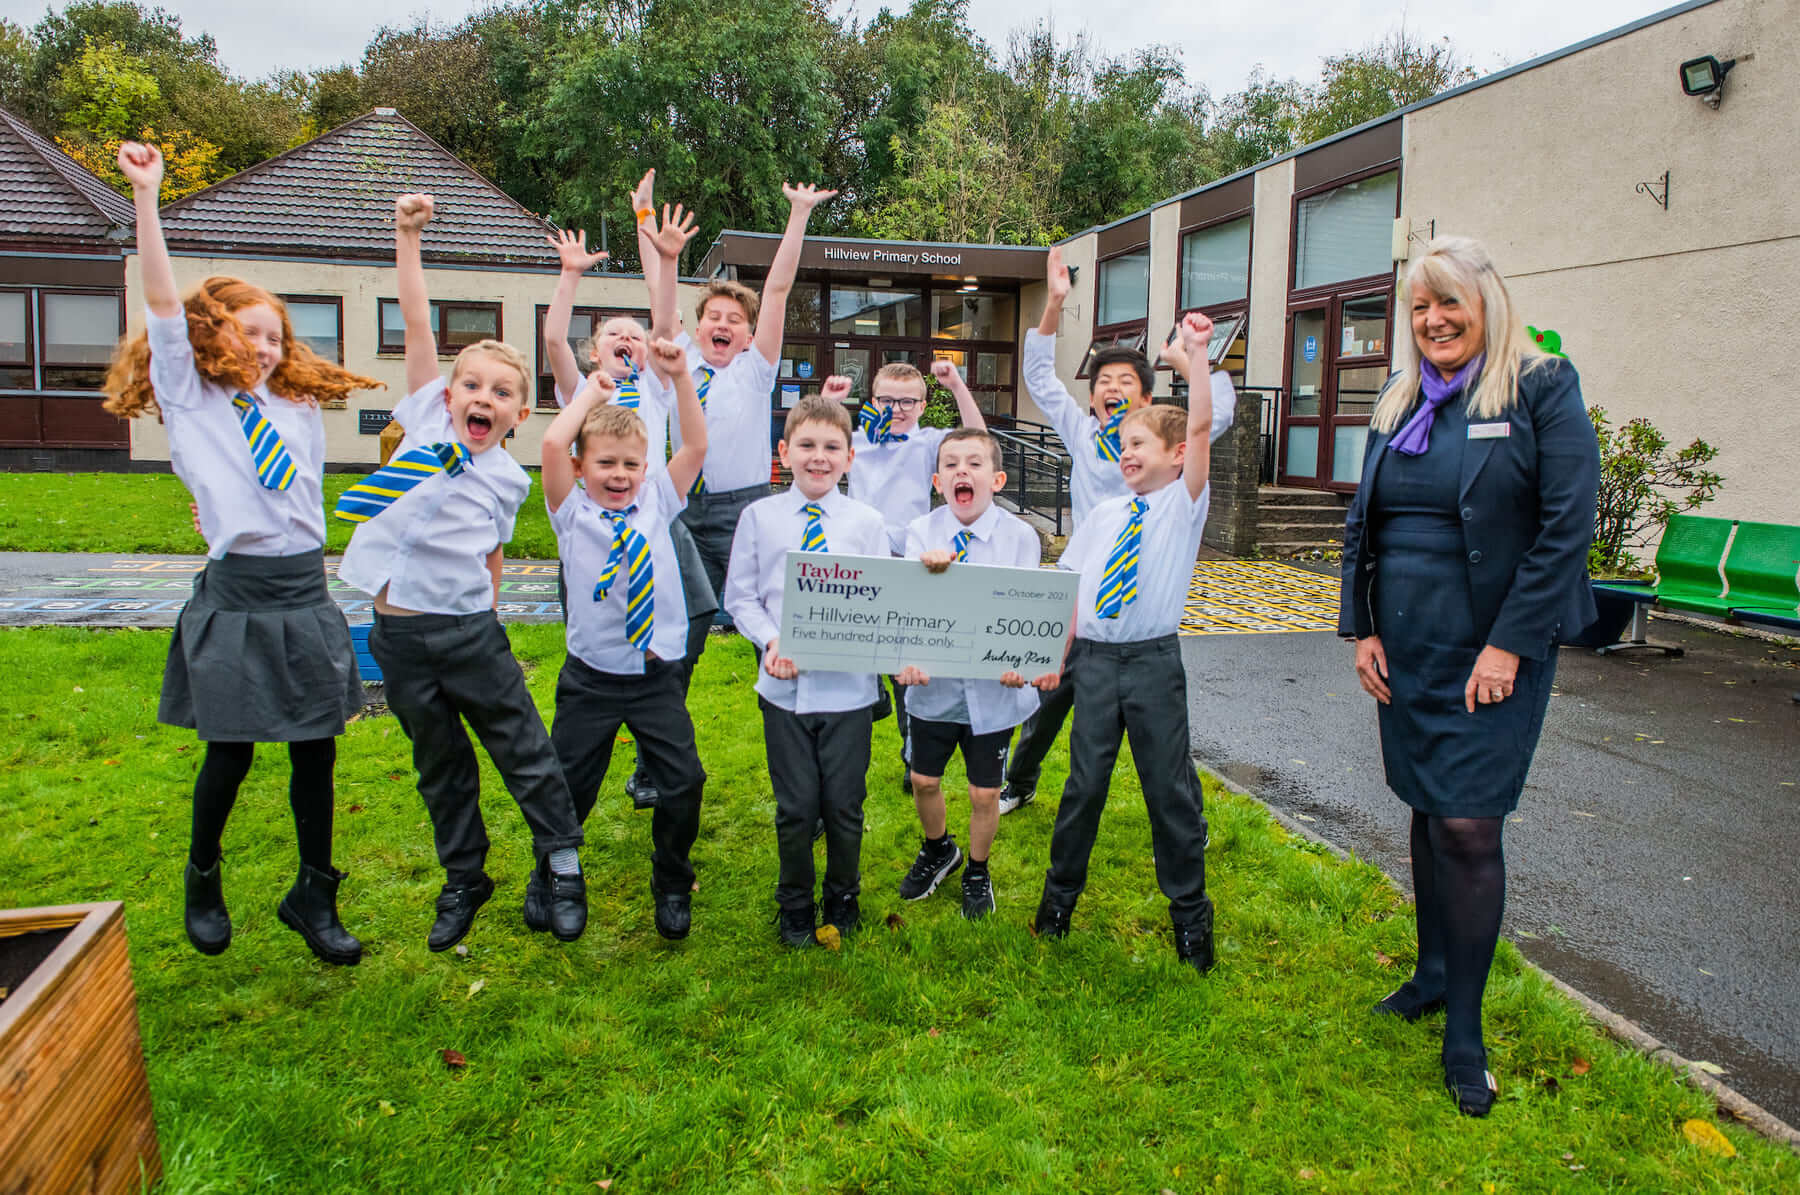 Hillview primary school Taylor Wimpey donation